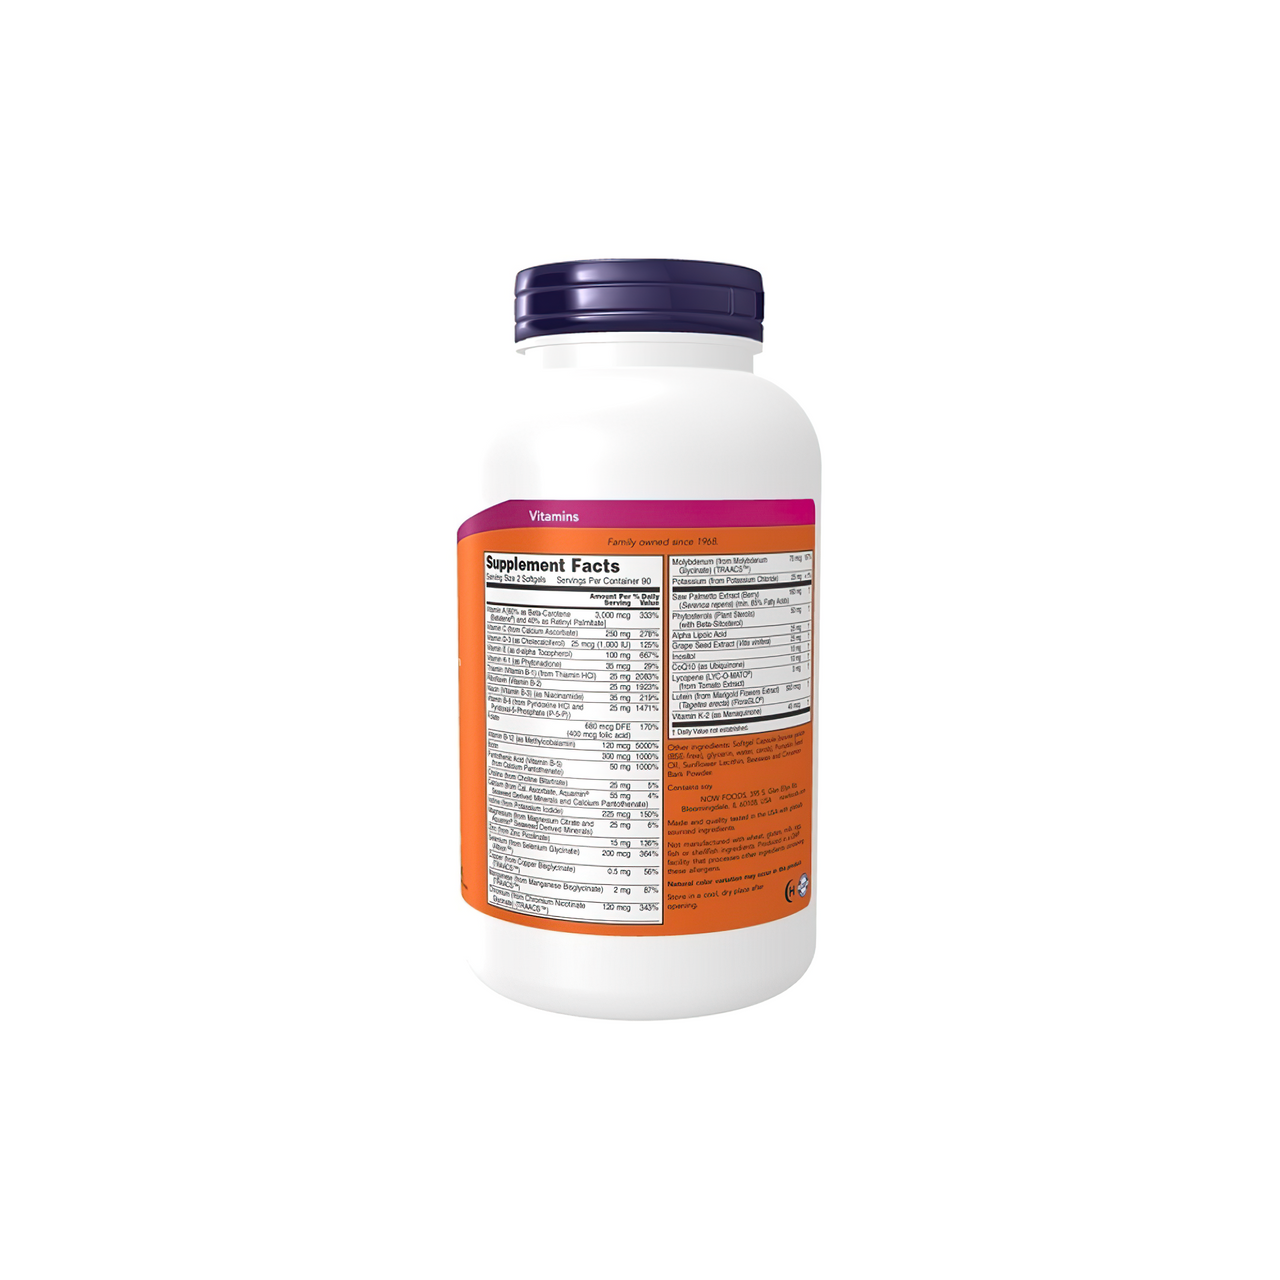 A bottle of Now Foods ADAM Multivitamins & Minerals for Man 180 sgel on a white background.